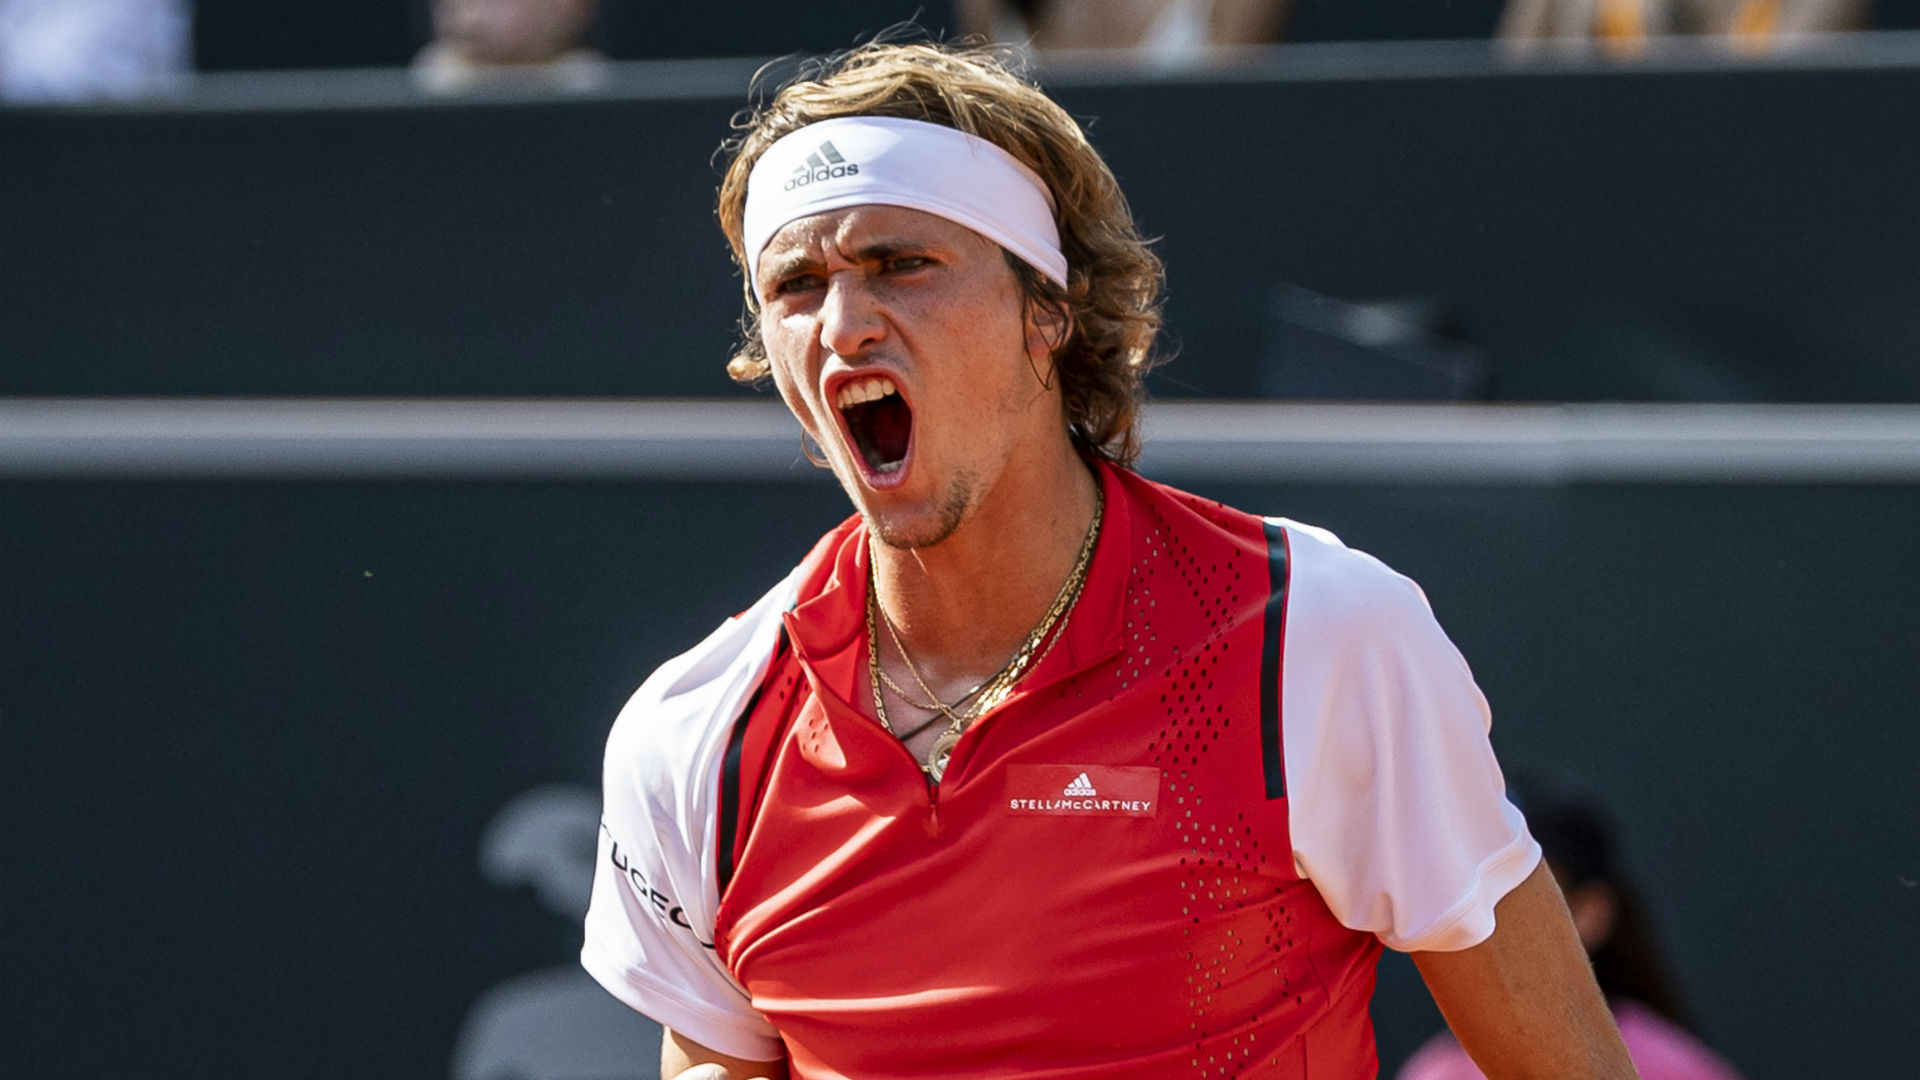 Alexander Zverev joined top seed Dominic Thiem in the last eight of the German Tennis Championships by beating Federico Delbonis.